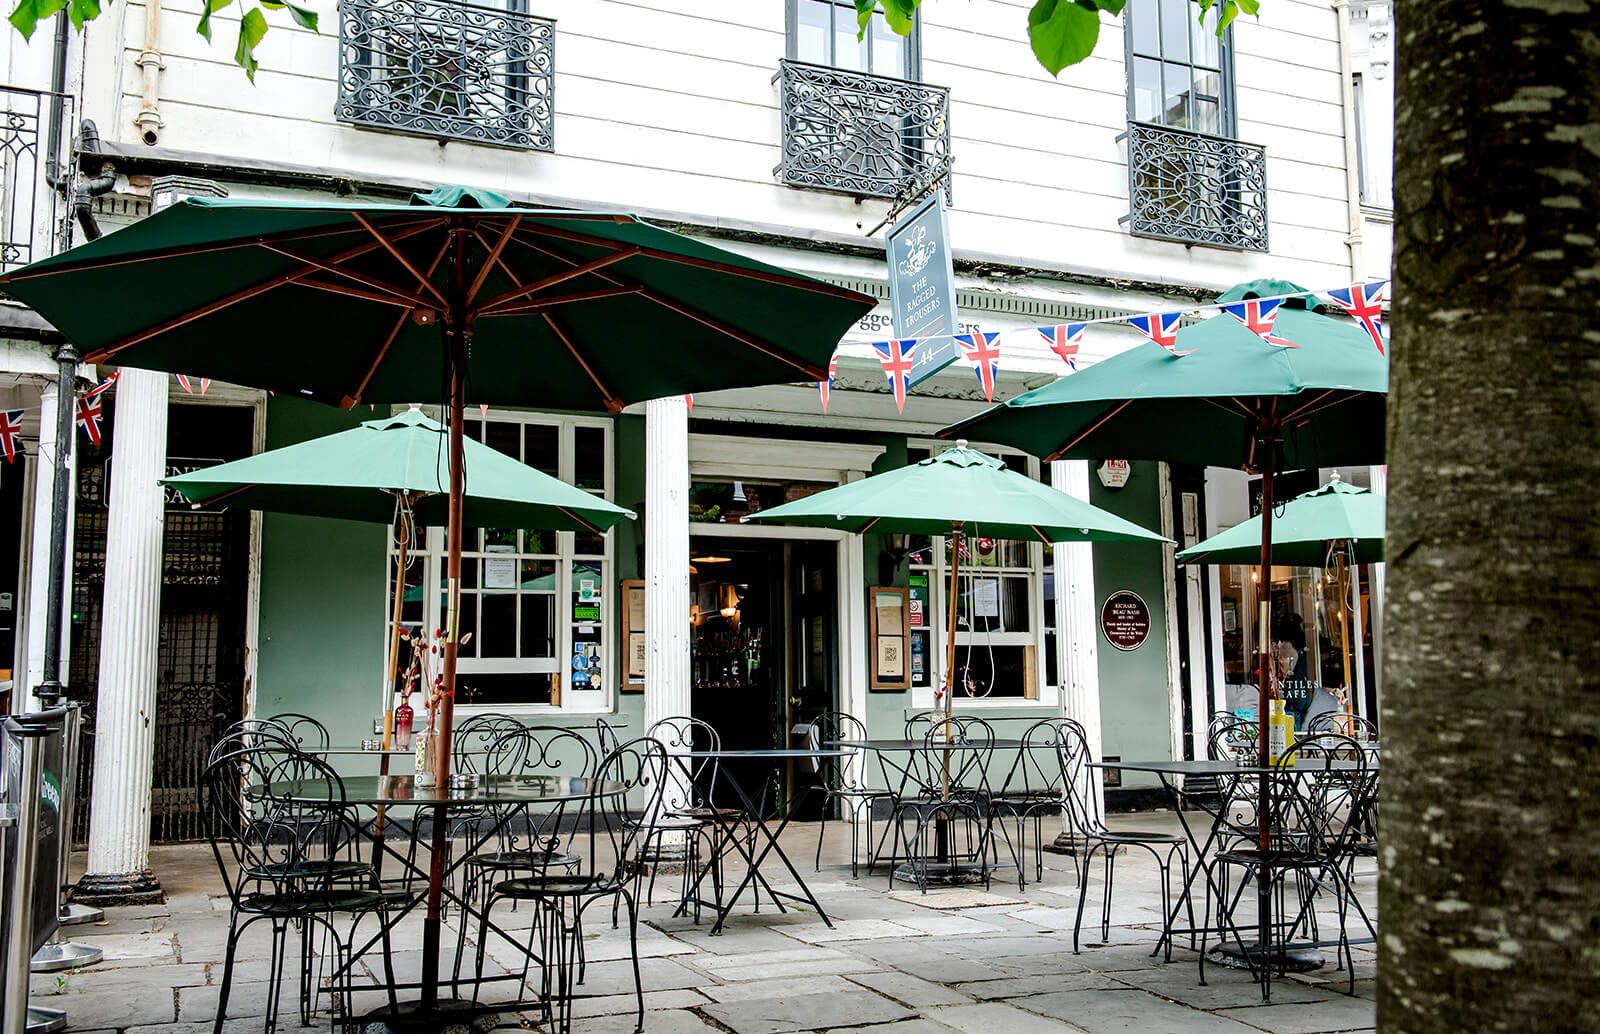 outdoor seating outside the Ragged Trousers brasserie in the Pantiles